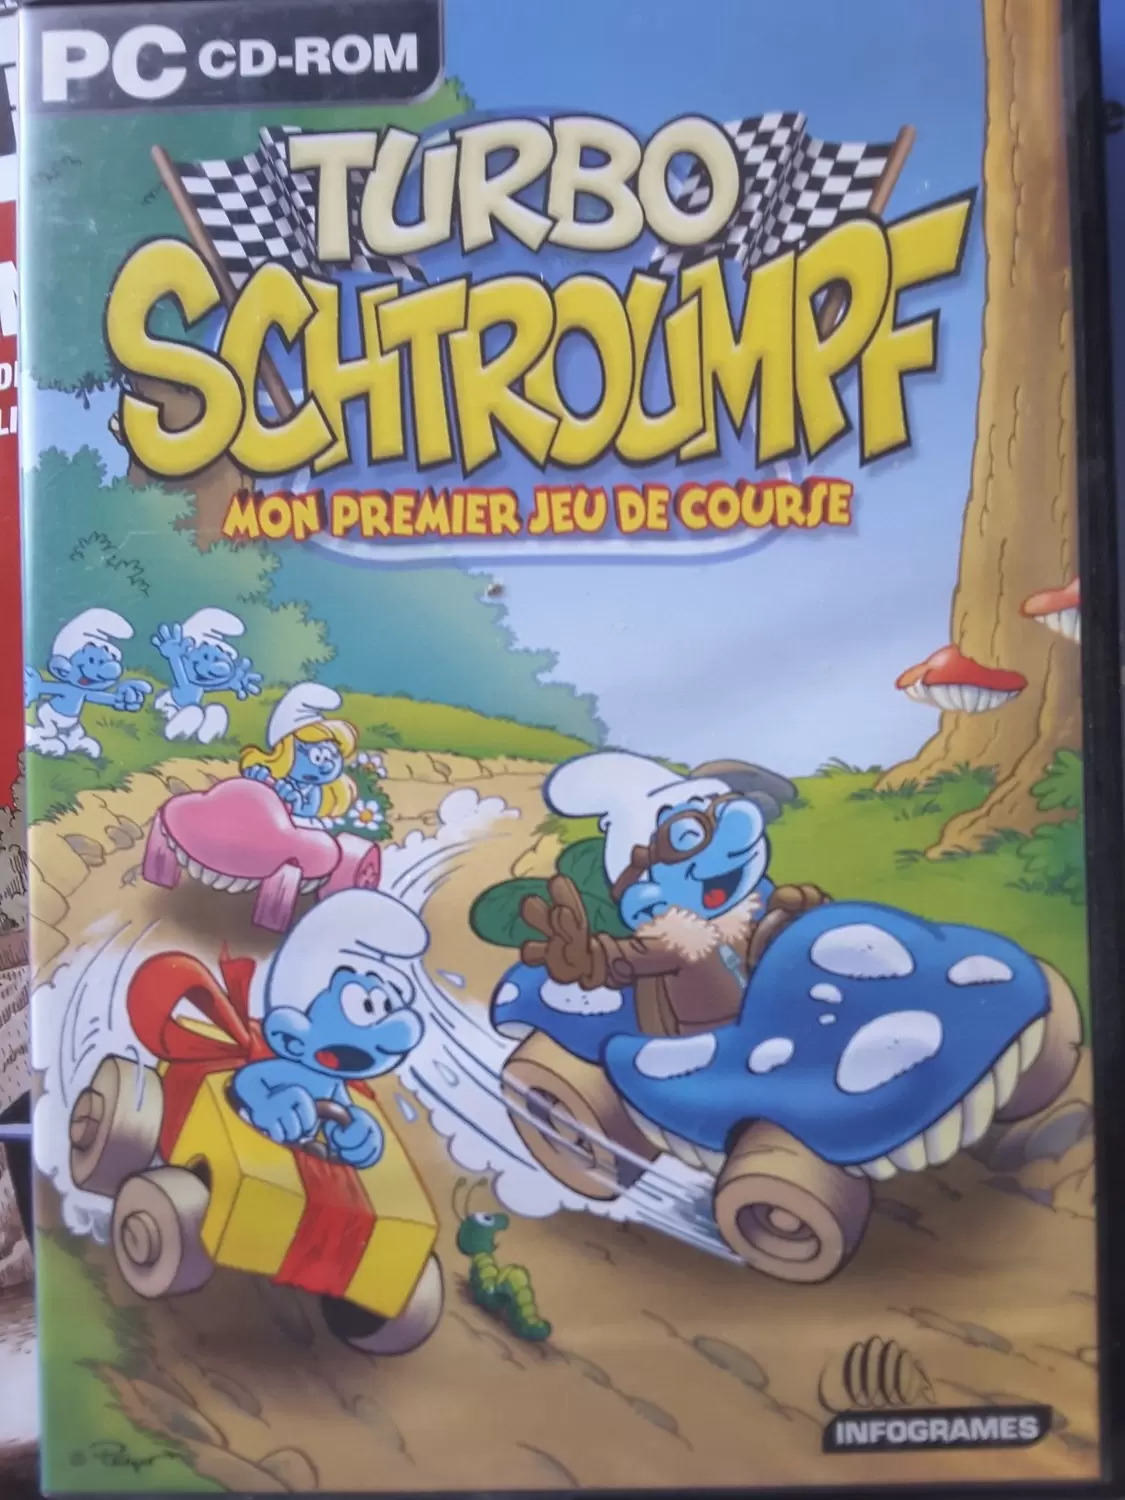 PC Games - Turbo Schtroumpf